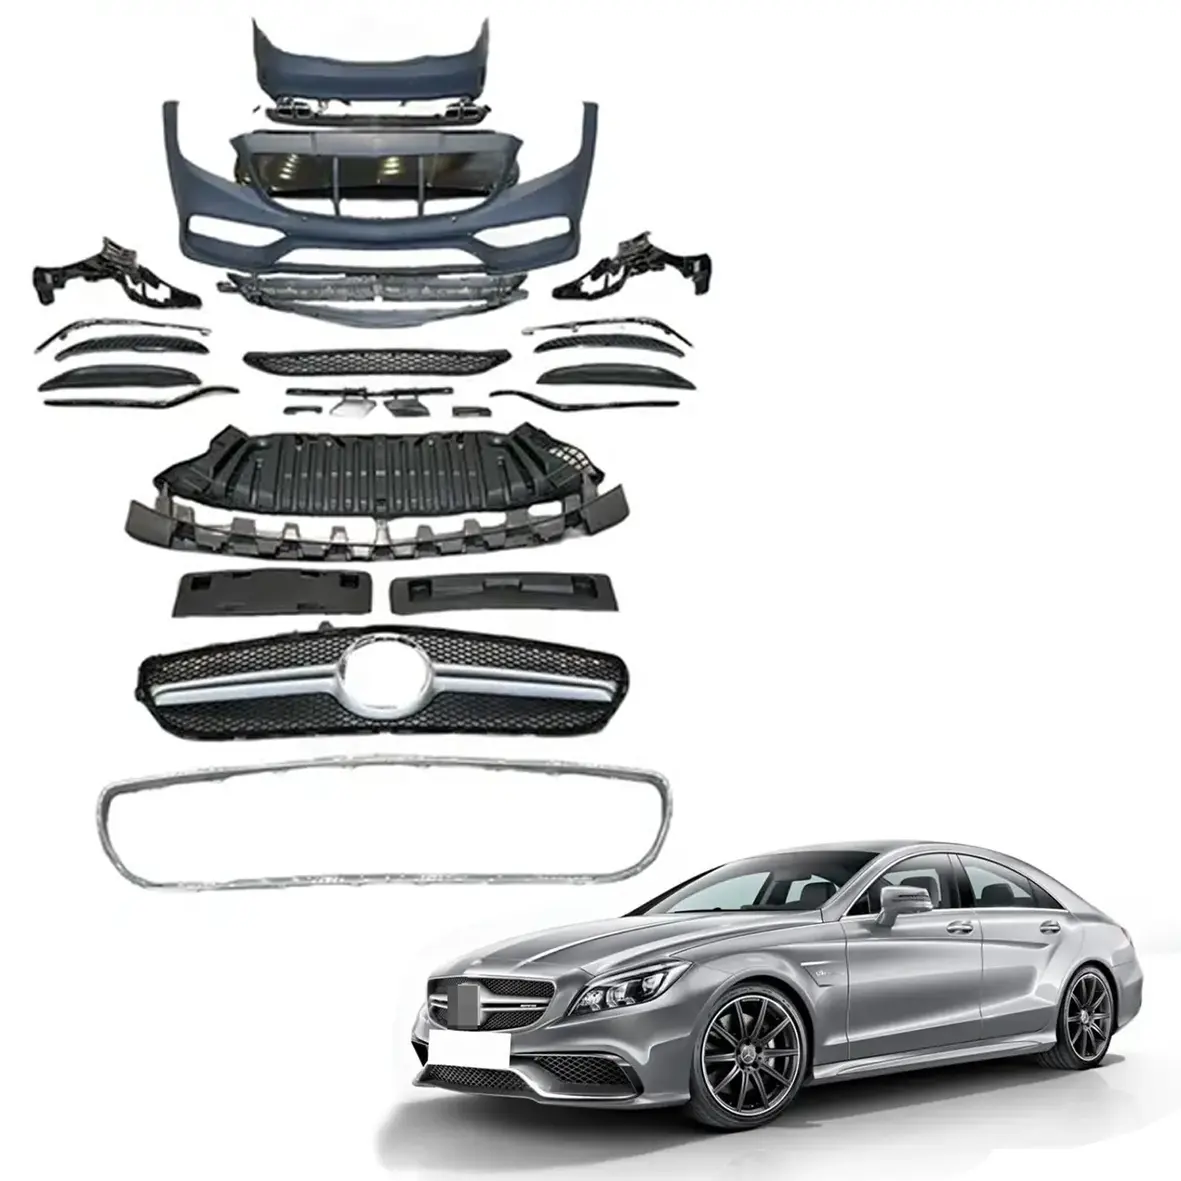 B SPM Bumper Face Kit Upgrade to Cls63 Amg Style Body Kit Plastic 1 Set 2015-2023 for Mercedes Benz Cls W218 Body Kit Accessories